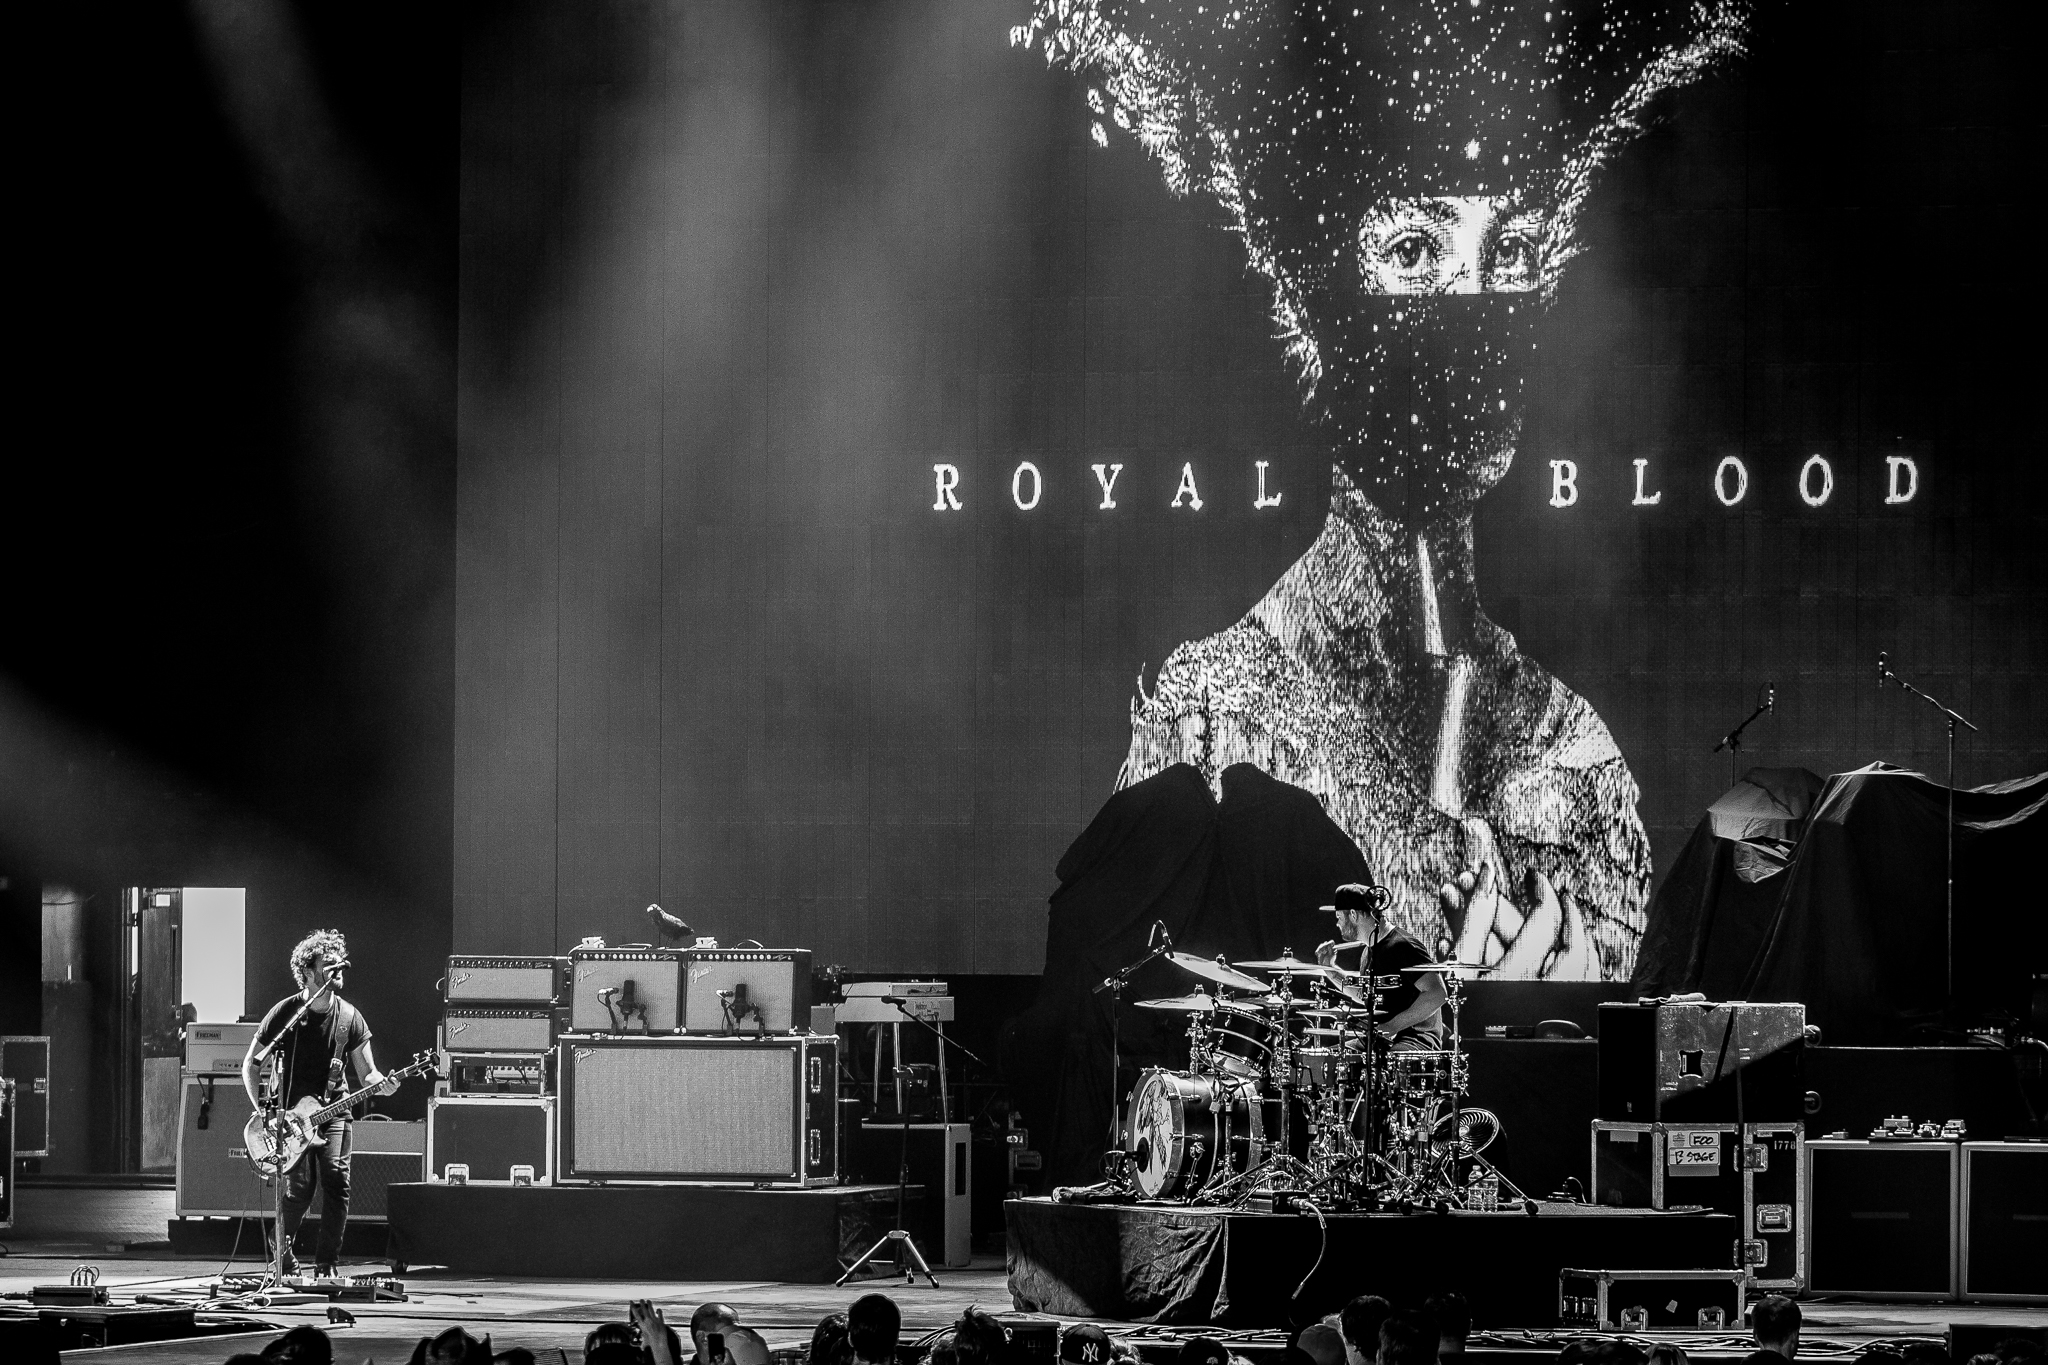 Royal Blood Announce New Album, New Single “Lights Out” Premieres Tomorrow